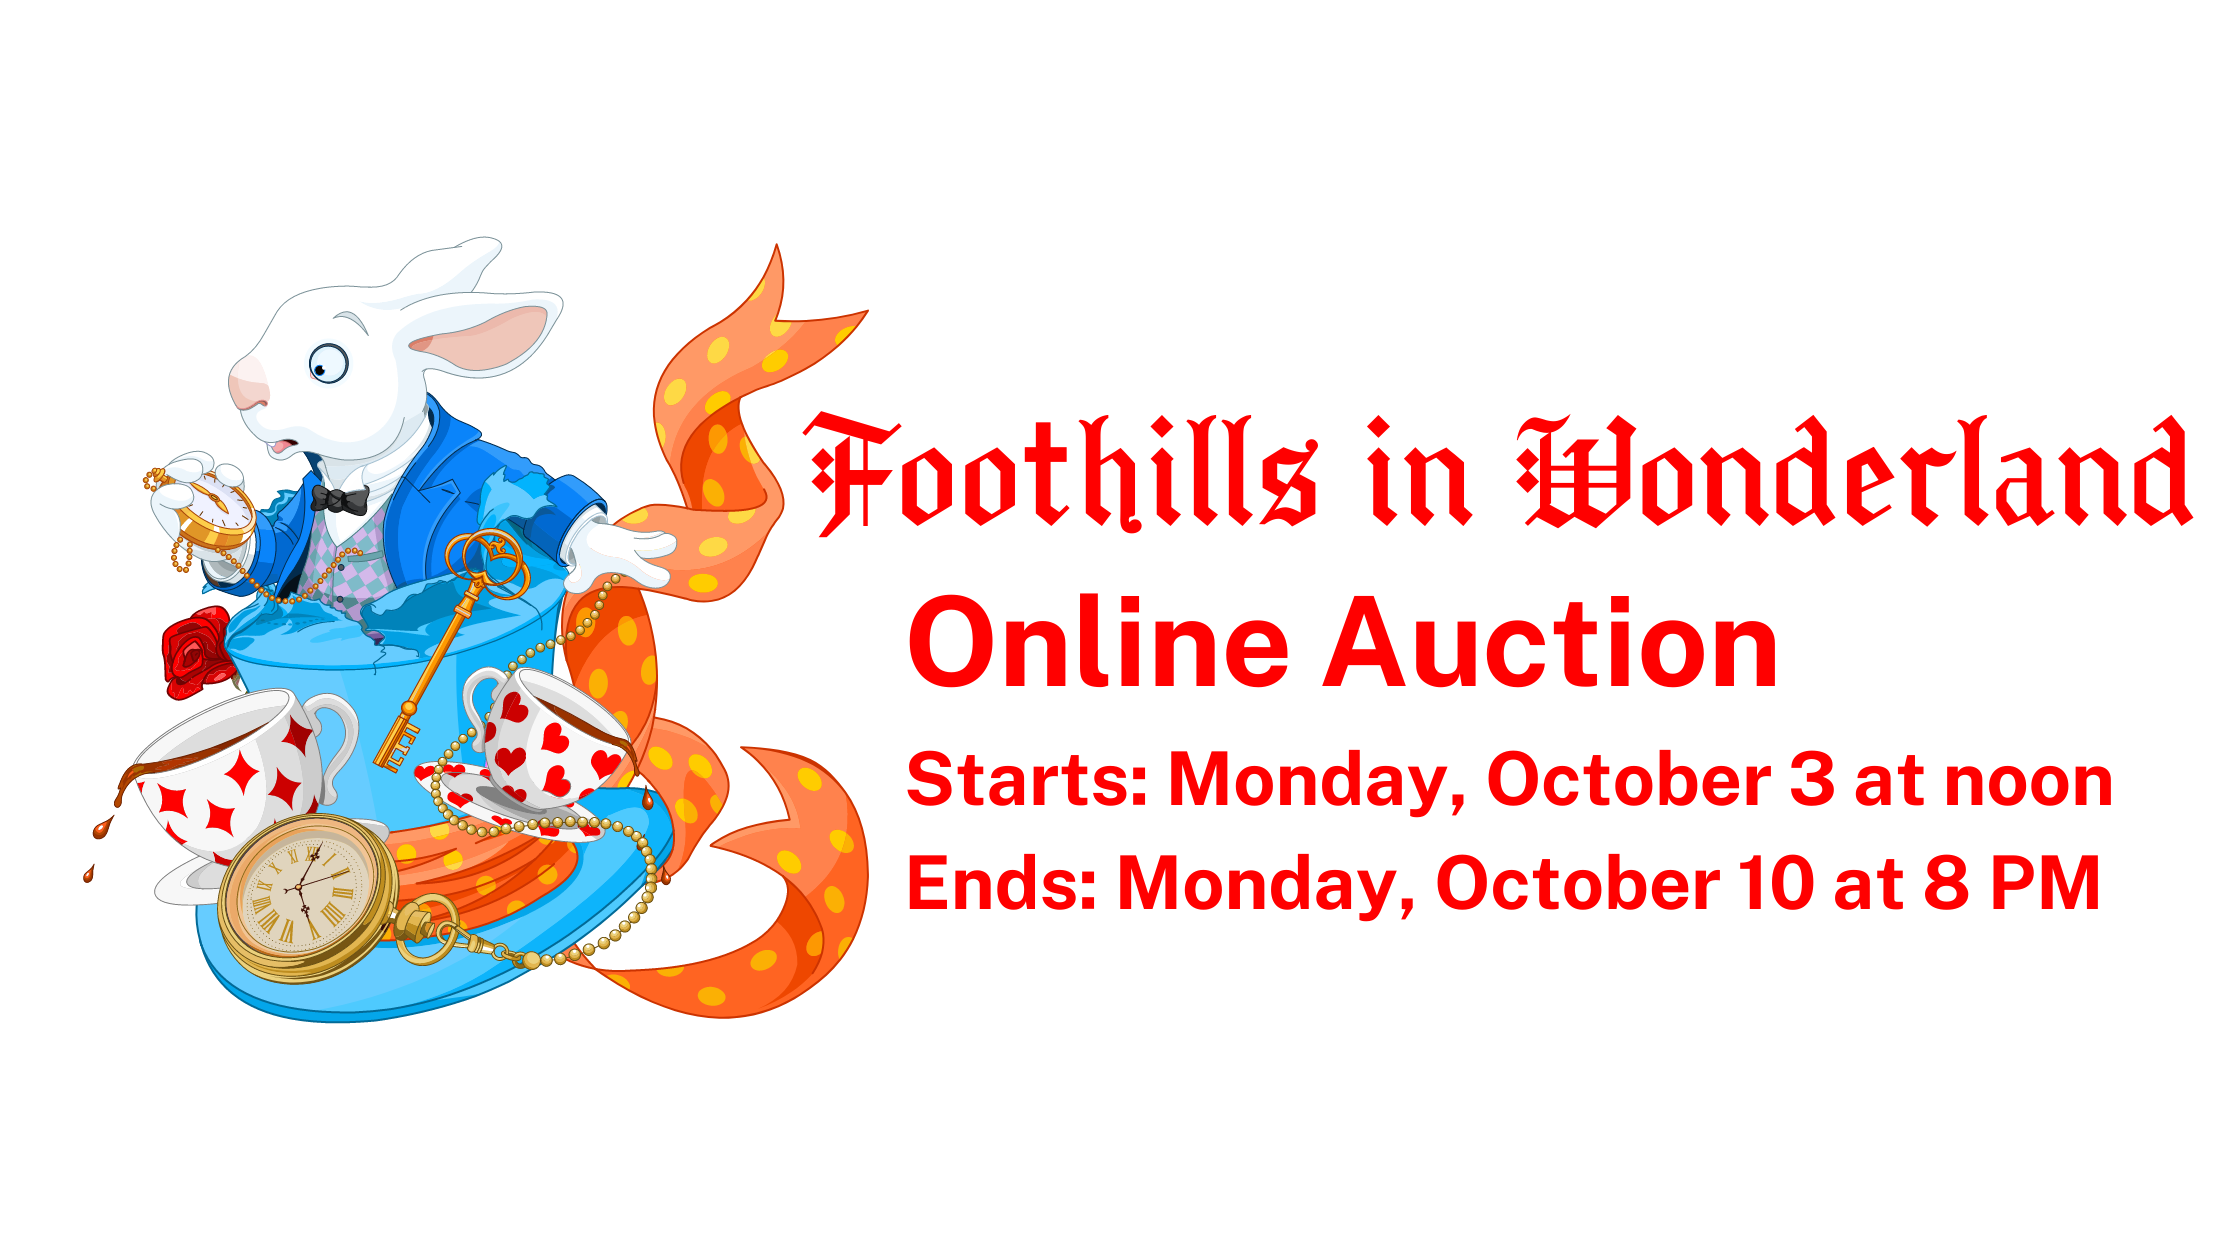 Auction Special Appeal